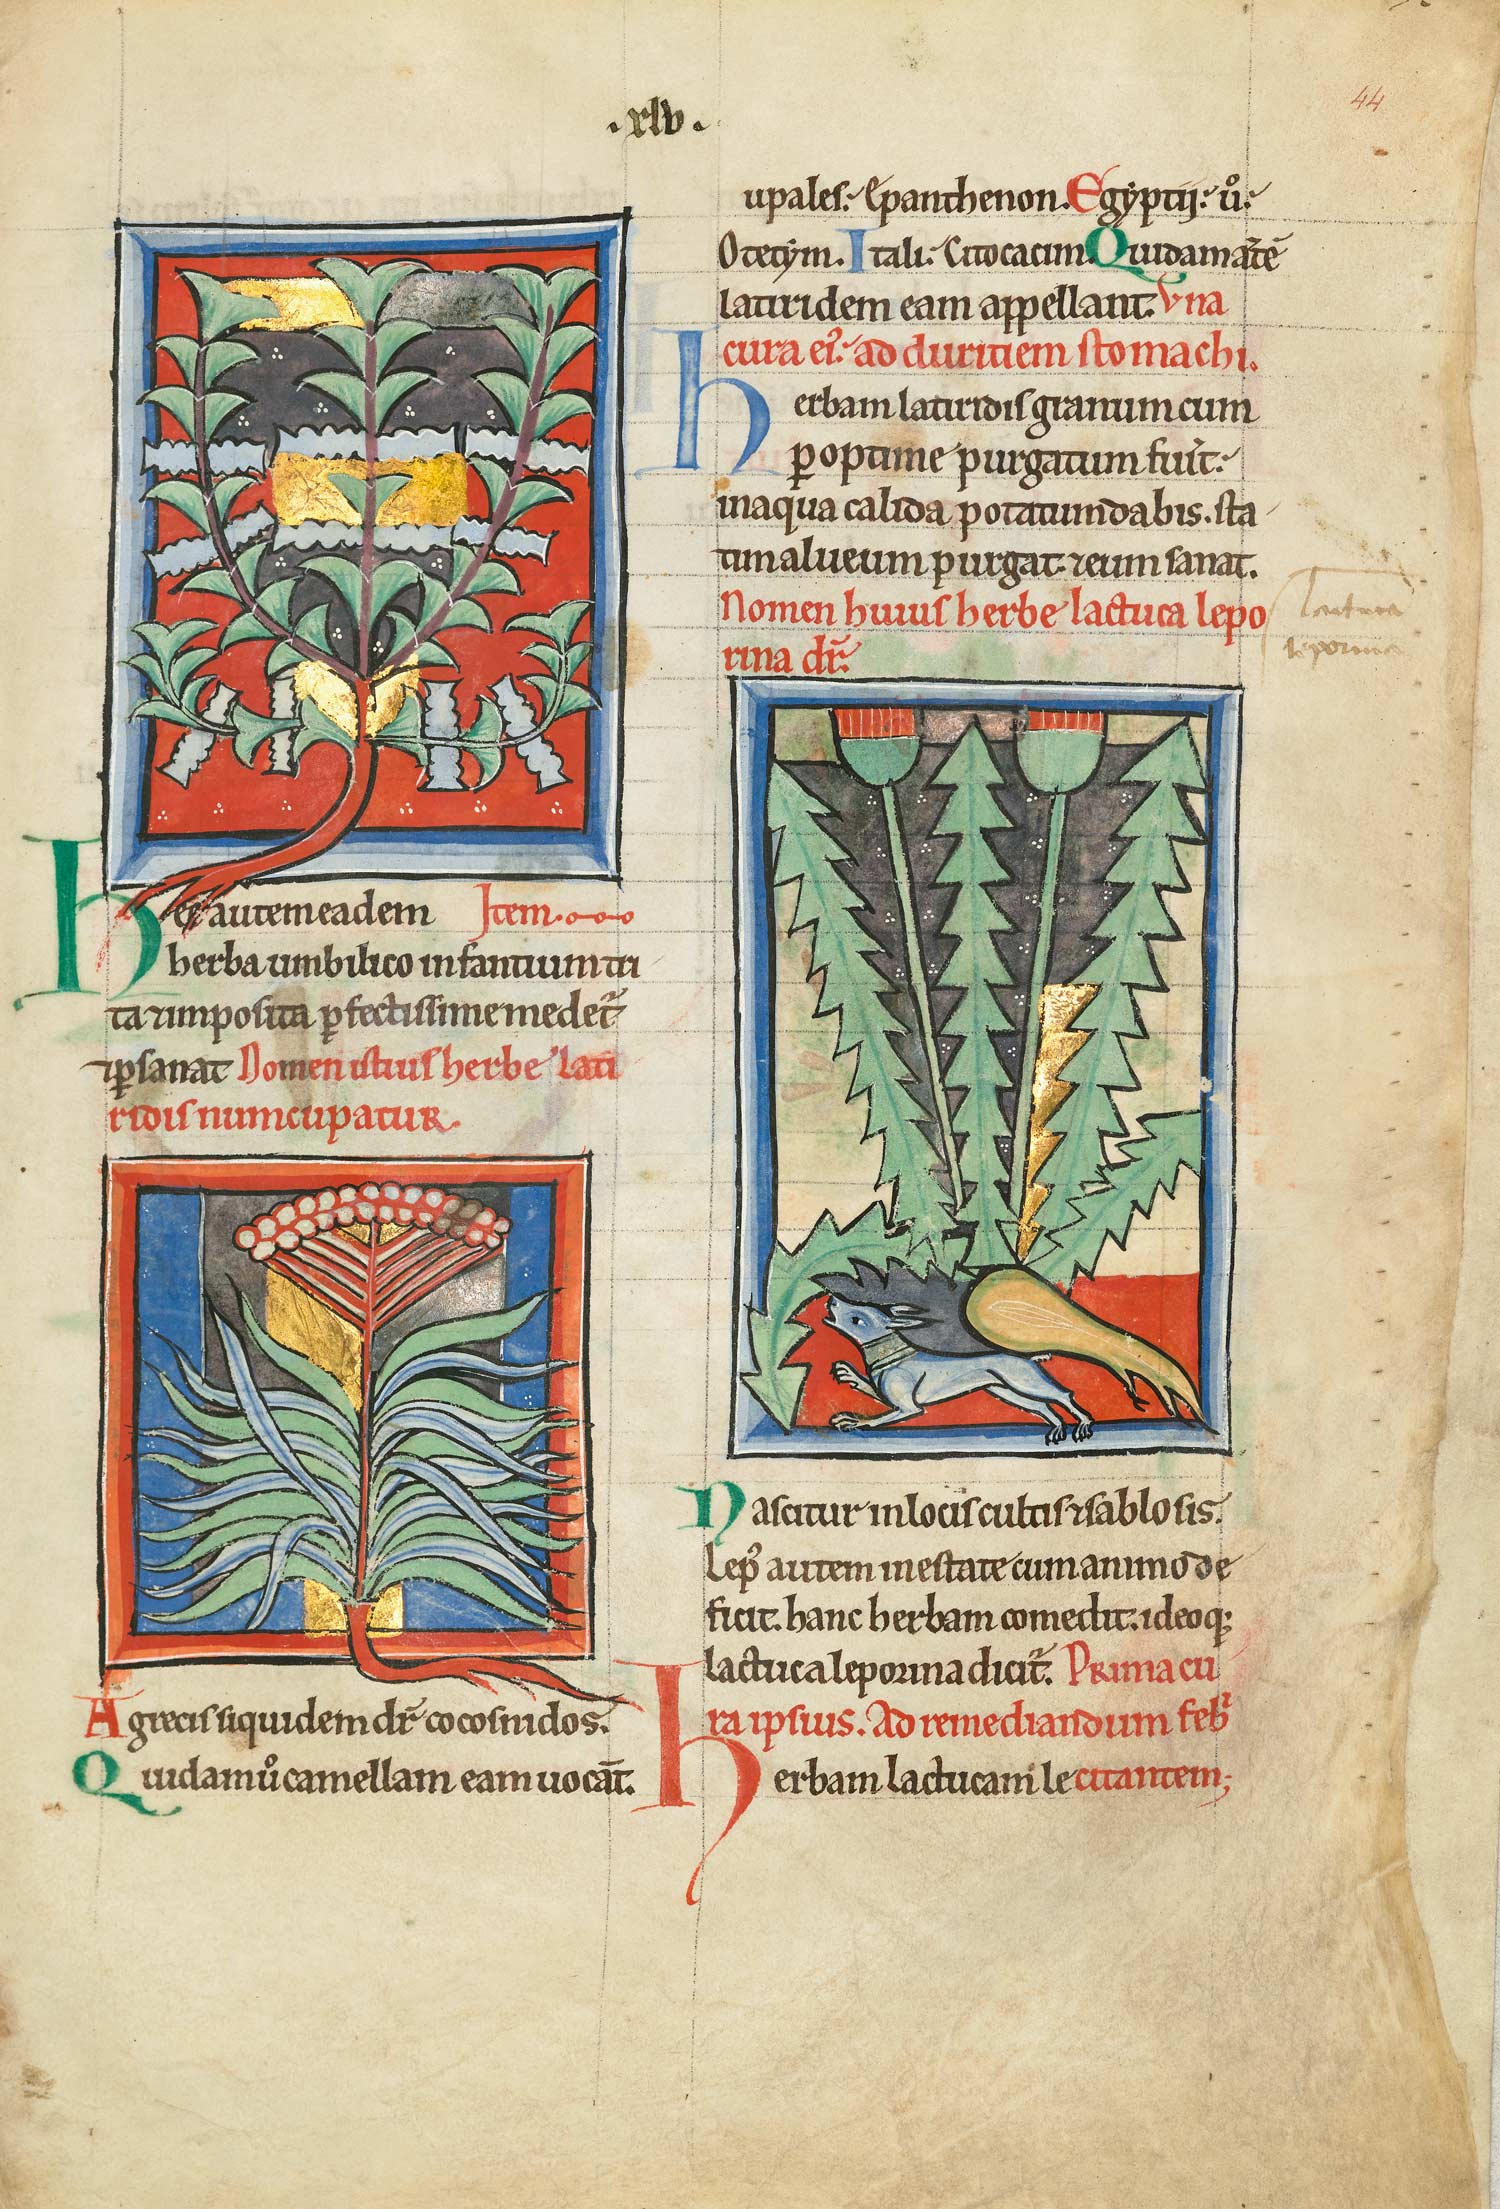 A fine art single page from the facsimile About Plants and Animals. Folio 44r shows with lupinus muntanus [=montanus] - wolf bean; latiridis - spring spurge; lactuca leporina - poisonous lettuce.